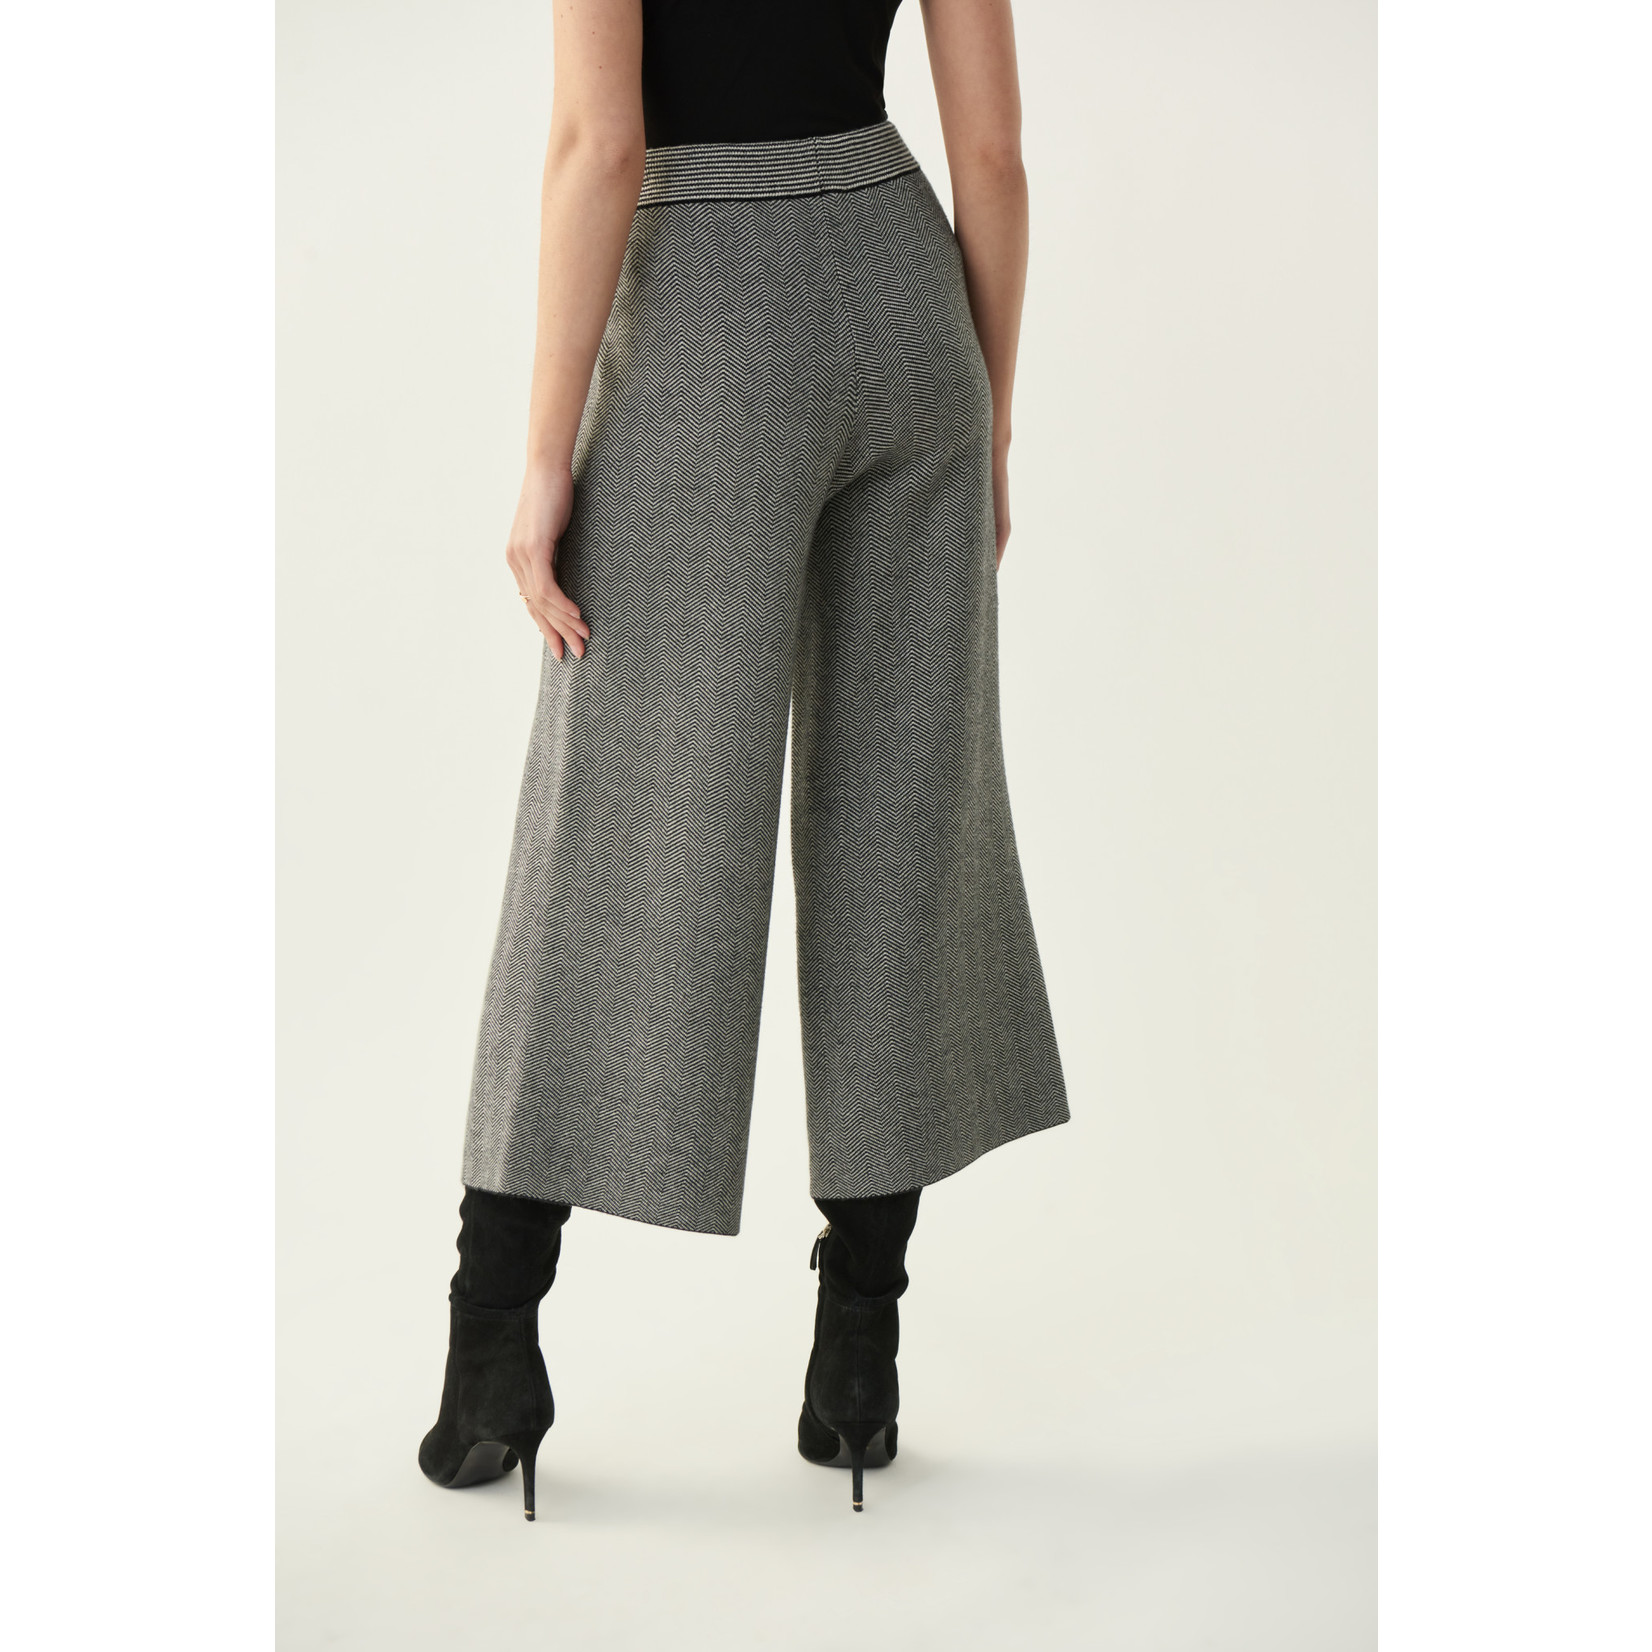 Joseph Ribkoff Houndstooth Culotte Pants Style 213920